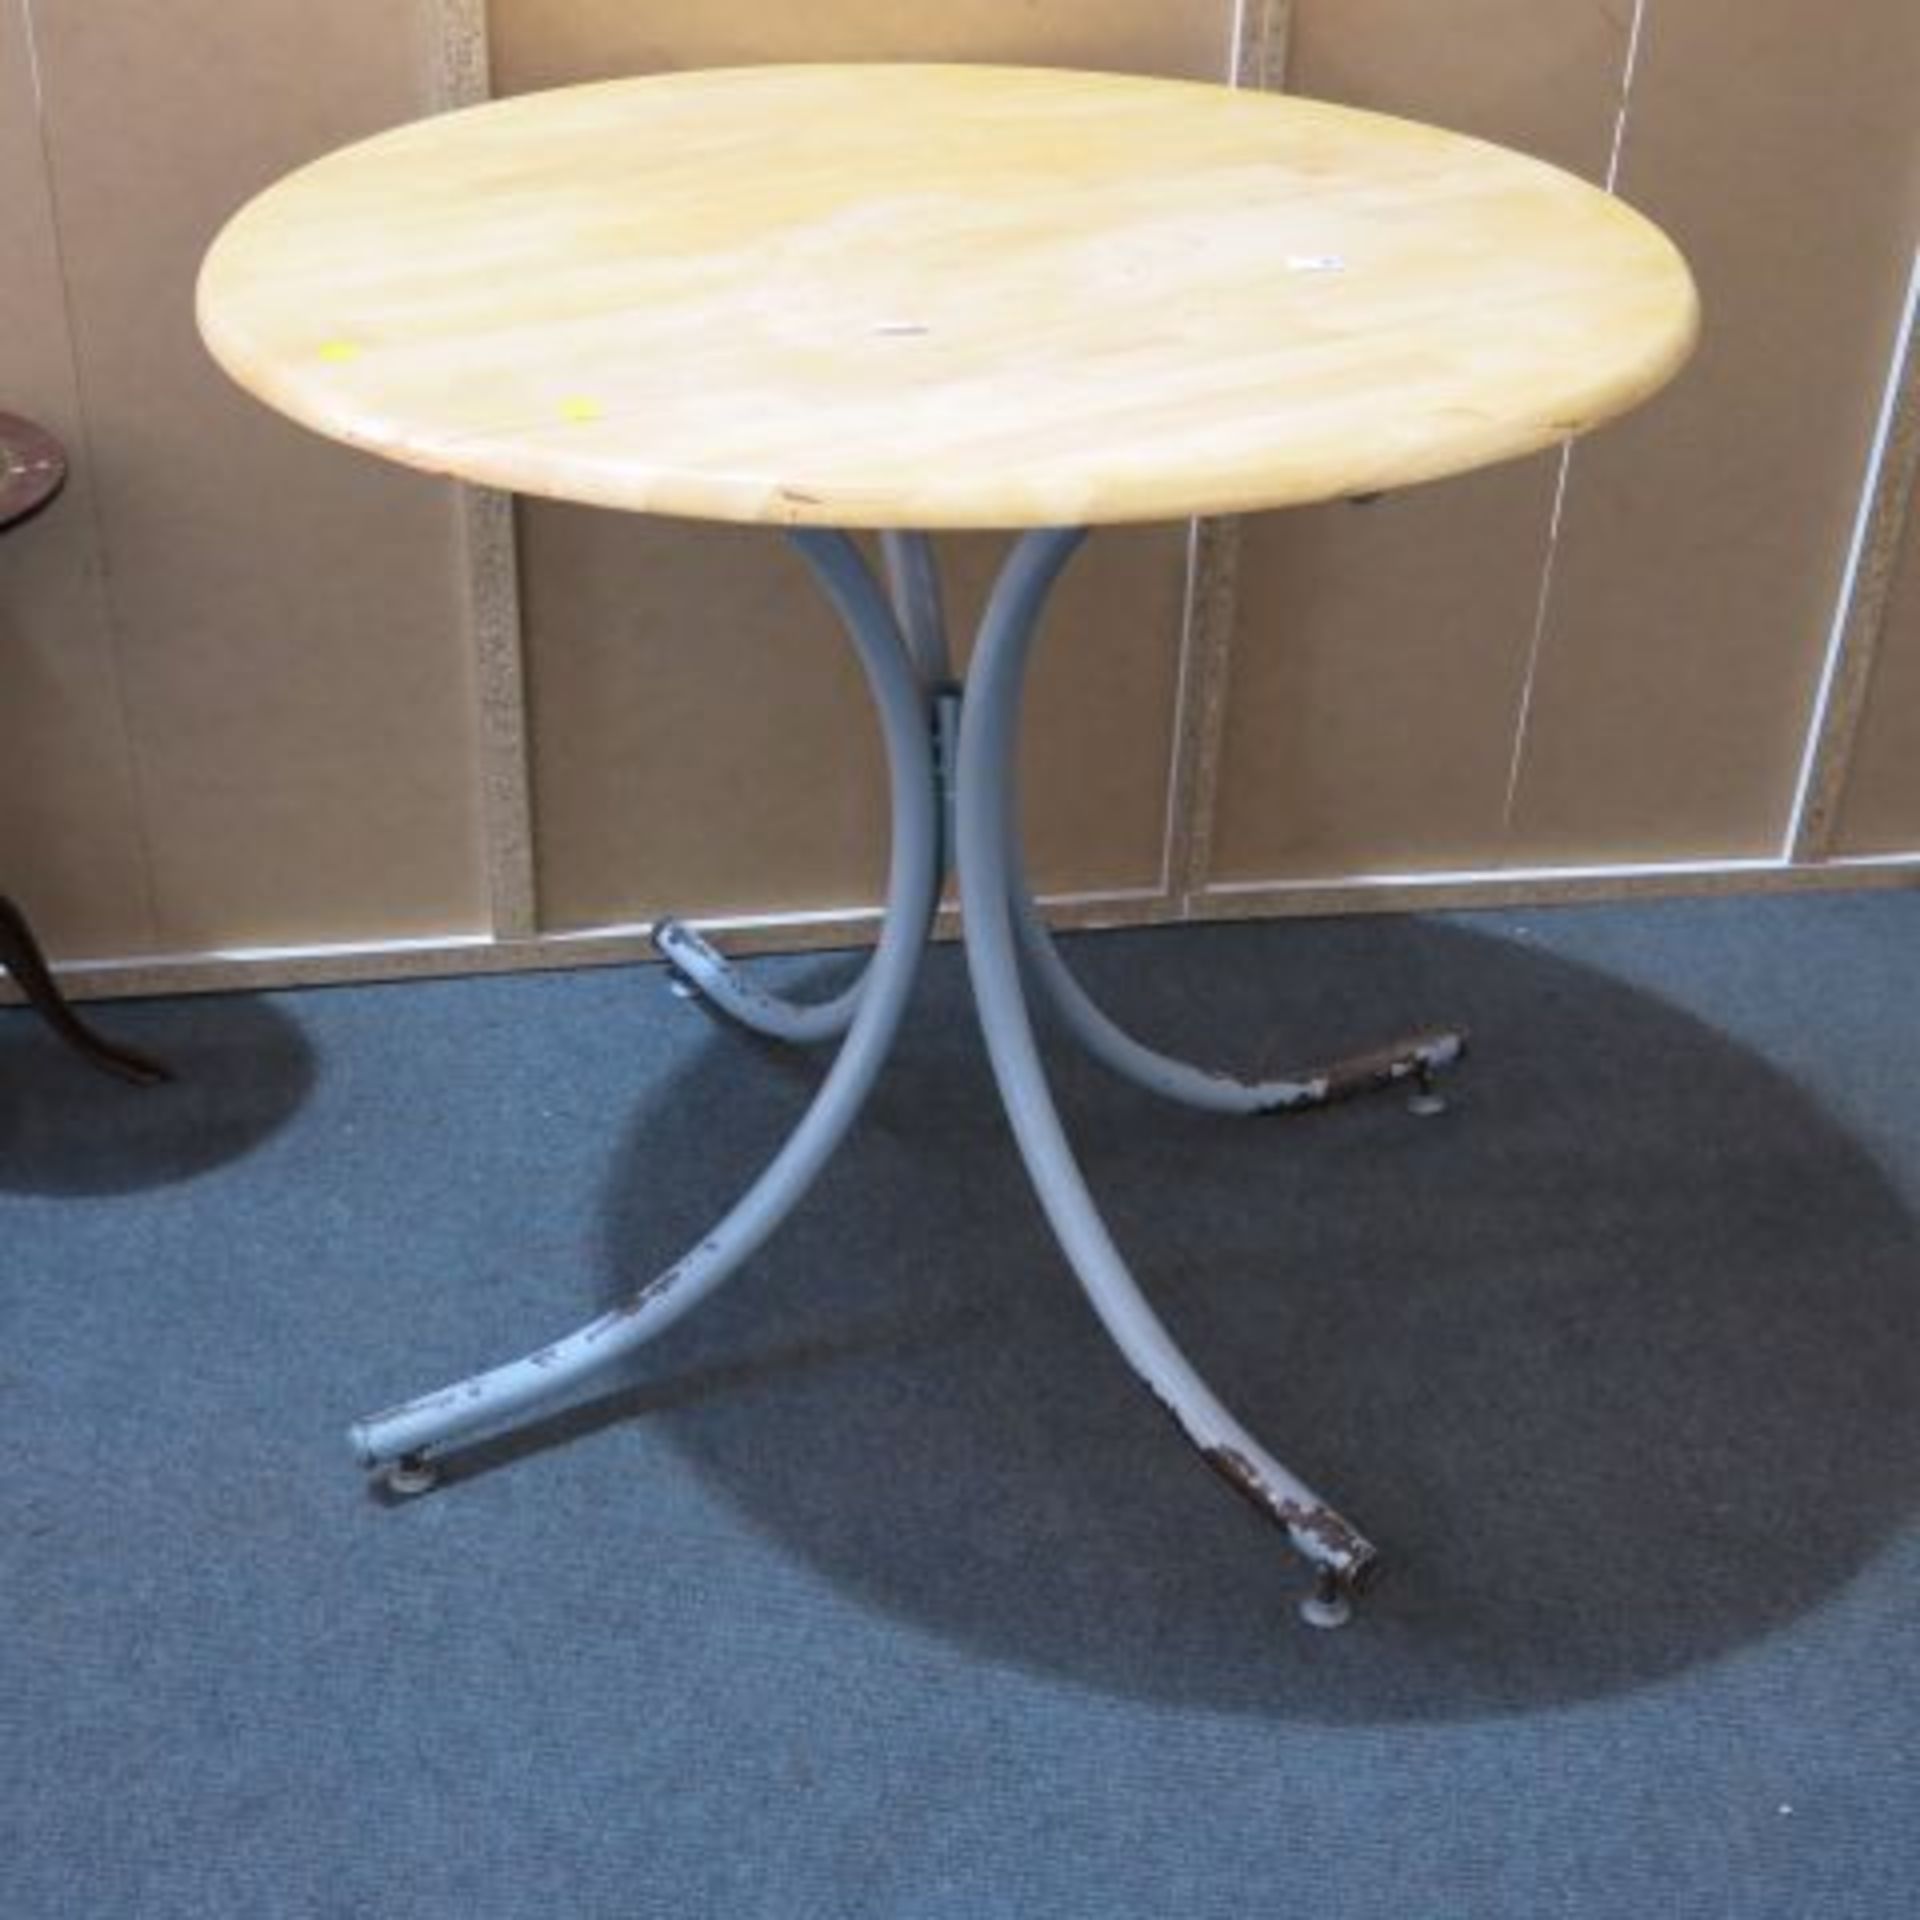 Four Tables. Two Pine Tables 90cm in diameter on Grey Painted Metal Supports, A Bleached Pine